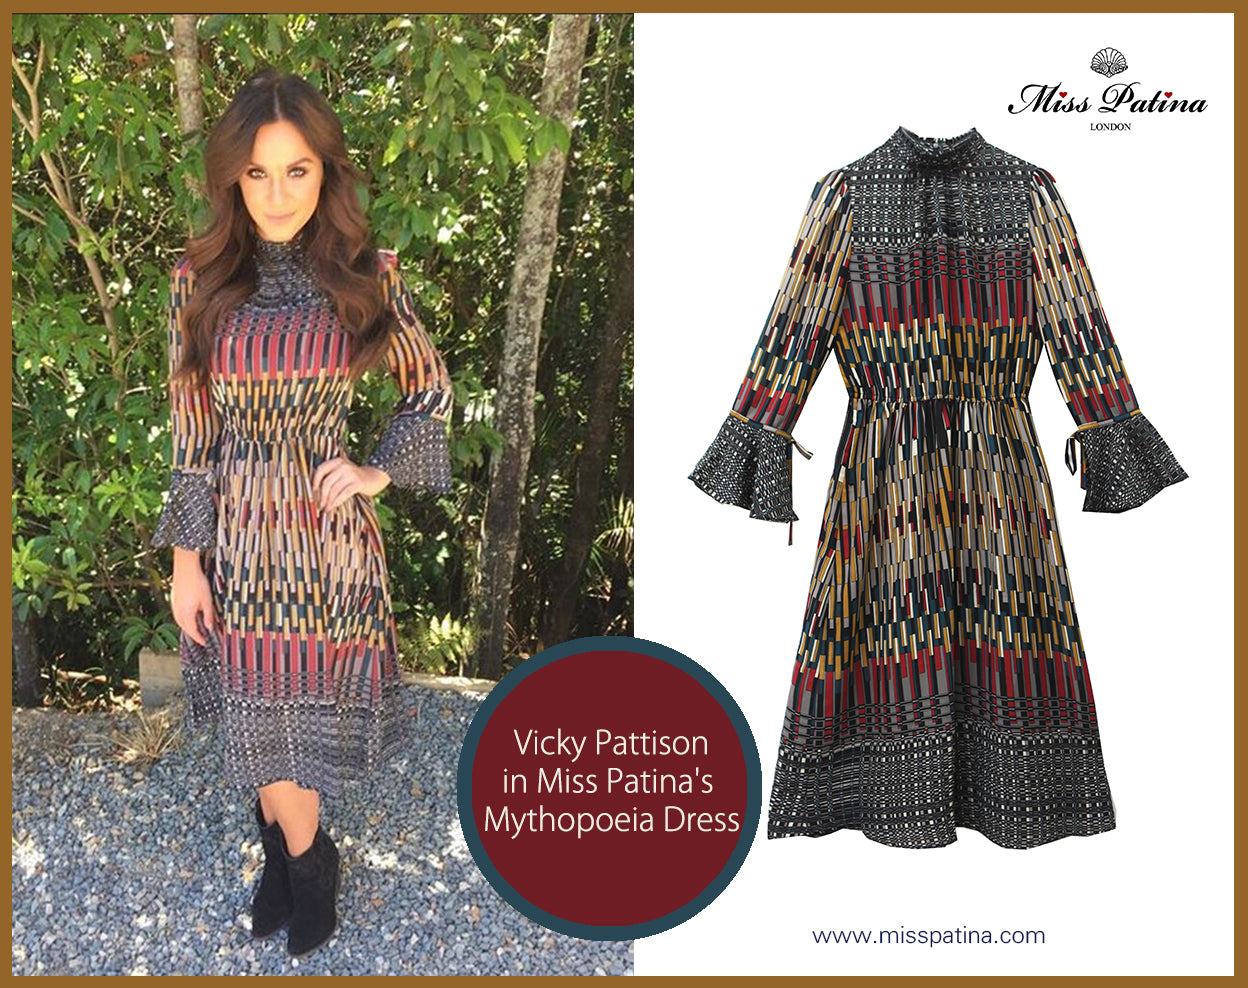 Spotted! Vicky Pattison in Miss Patina!